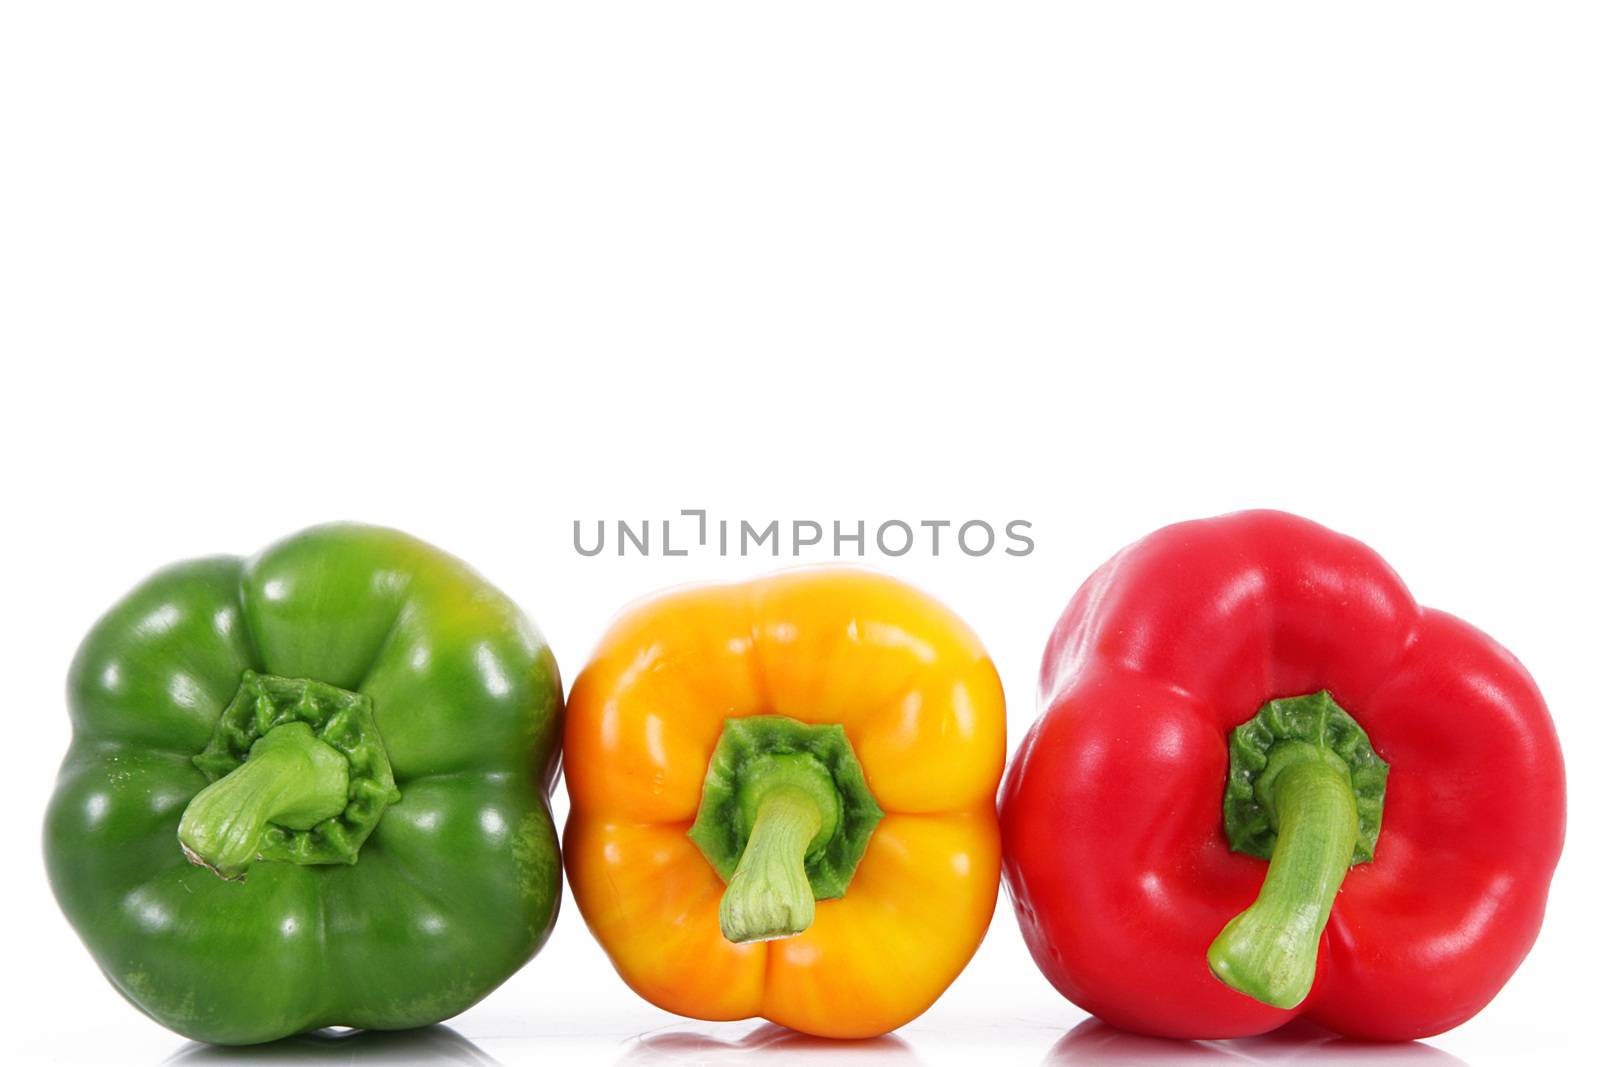 hot peppers on white background by photobeps